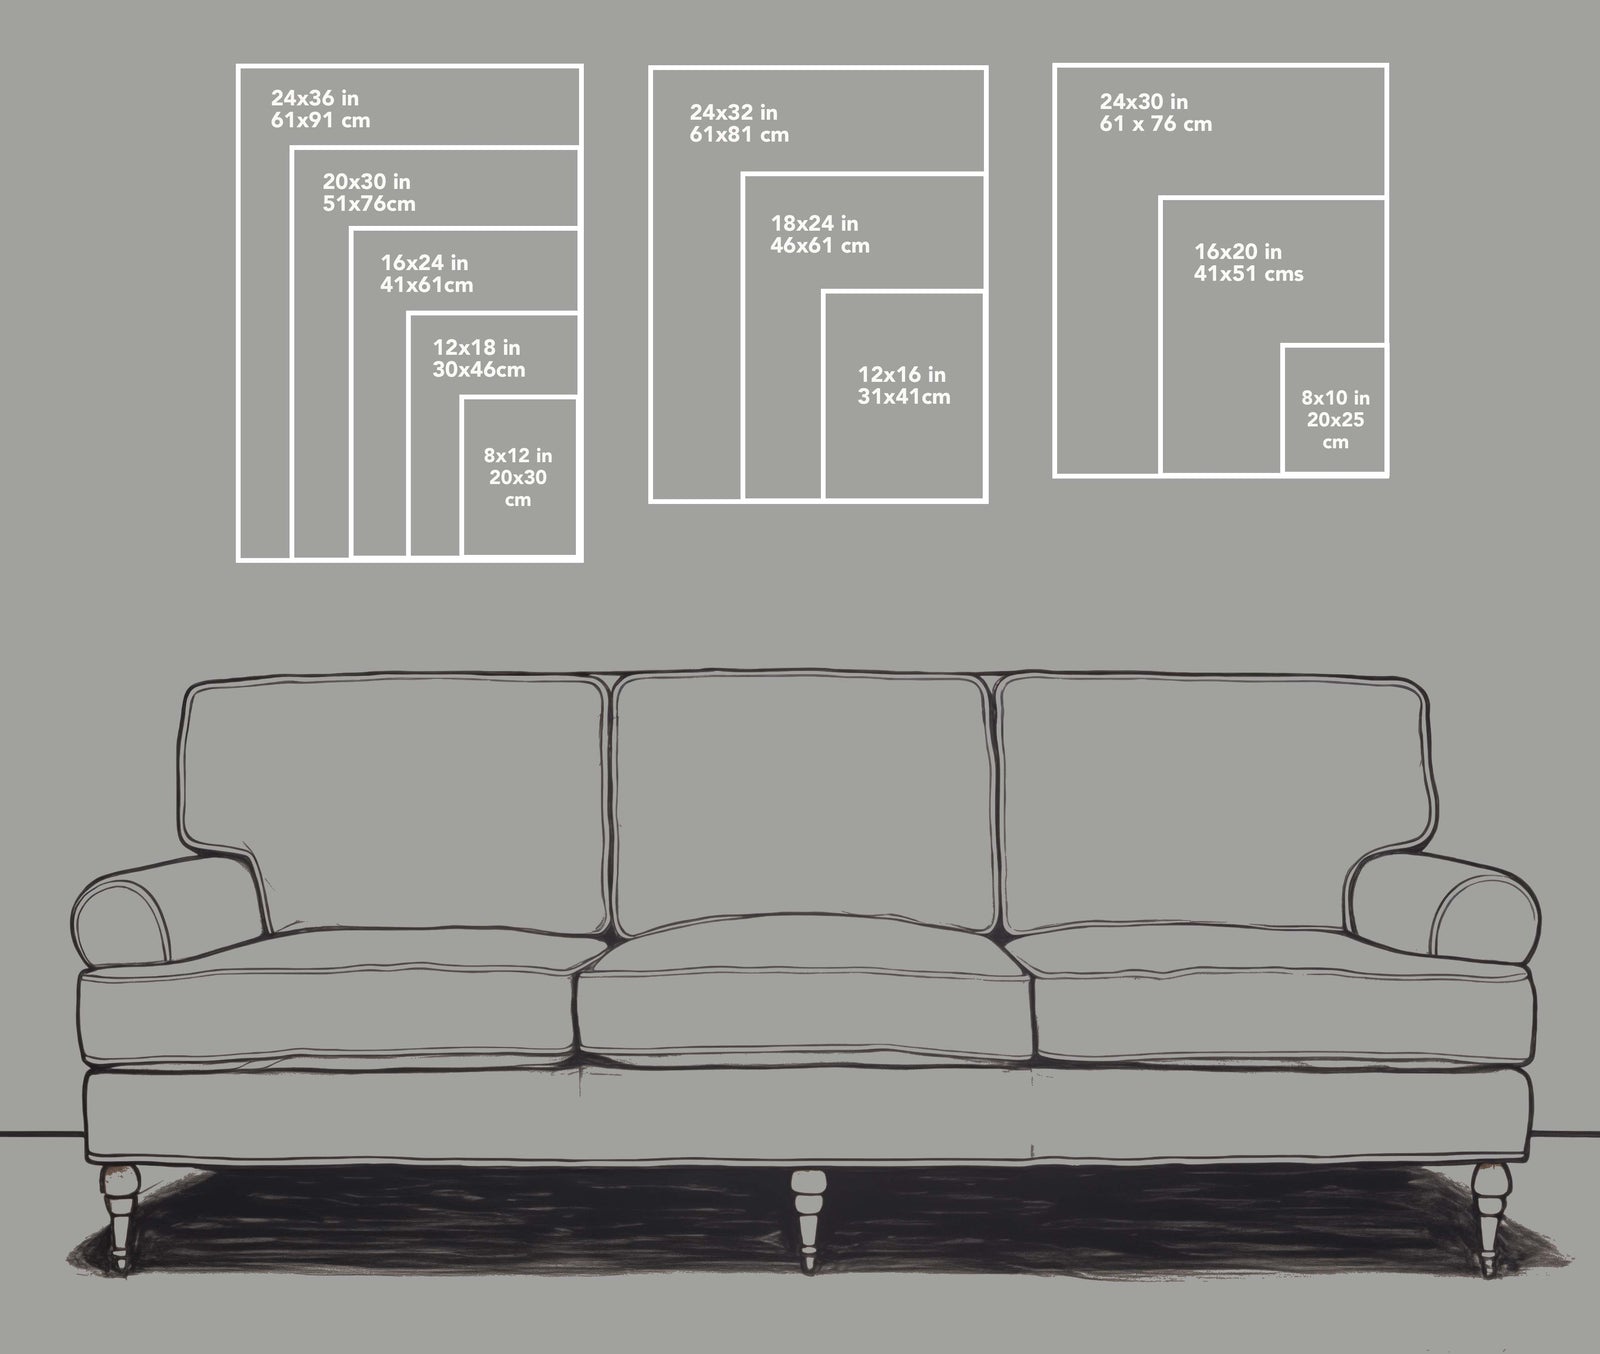 This image gives you an idea of how large your print will look compared to an average three seater sofa